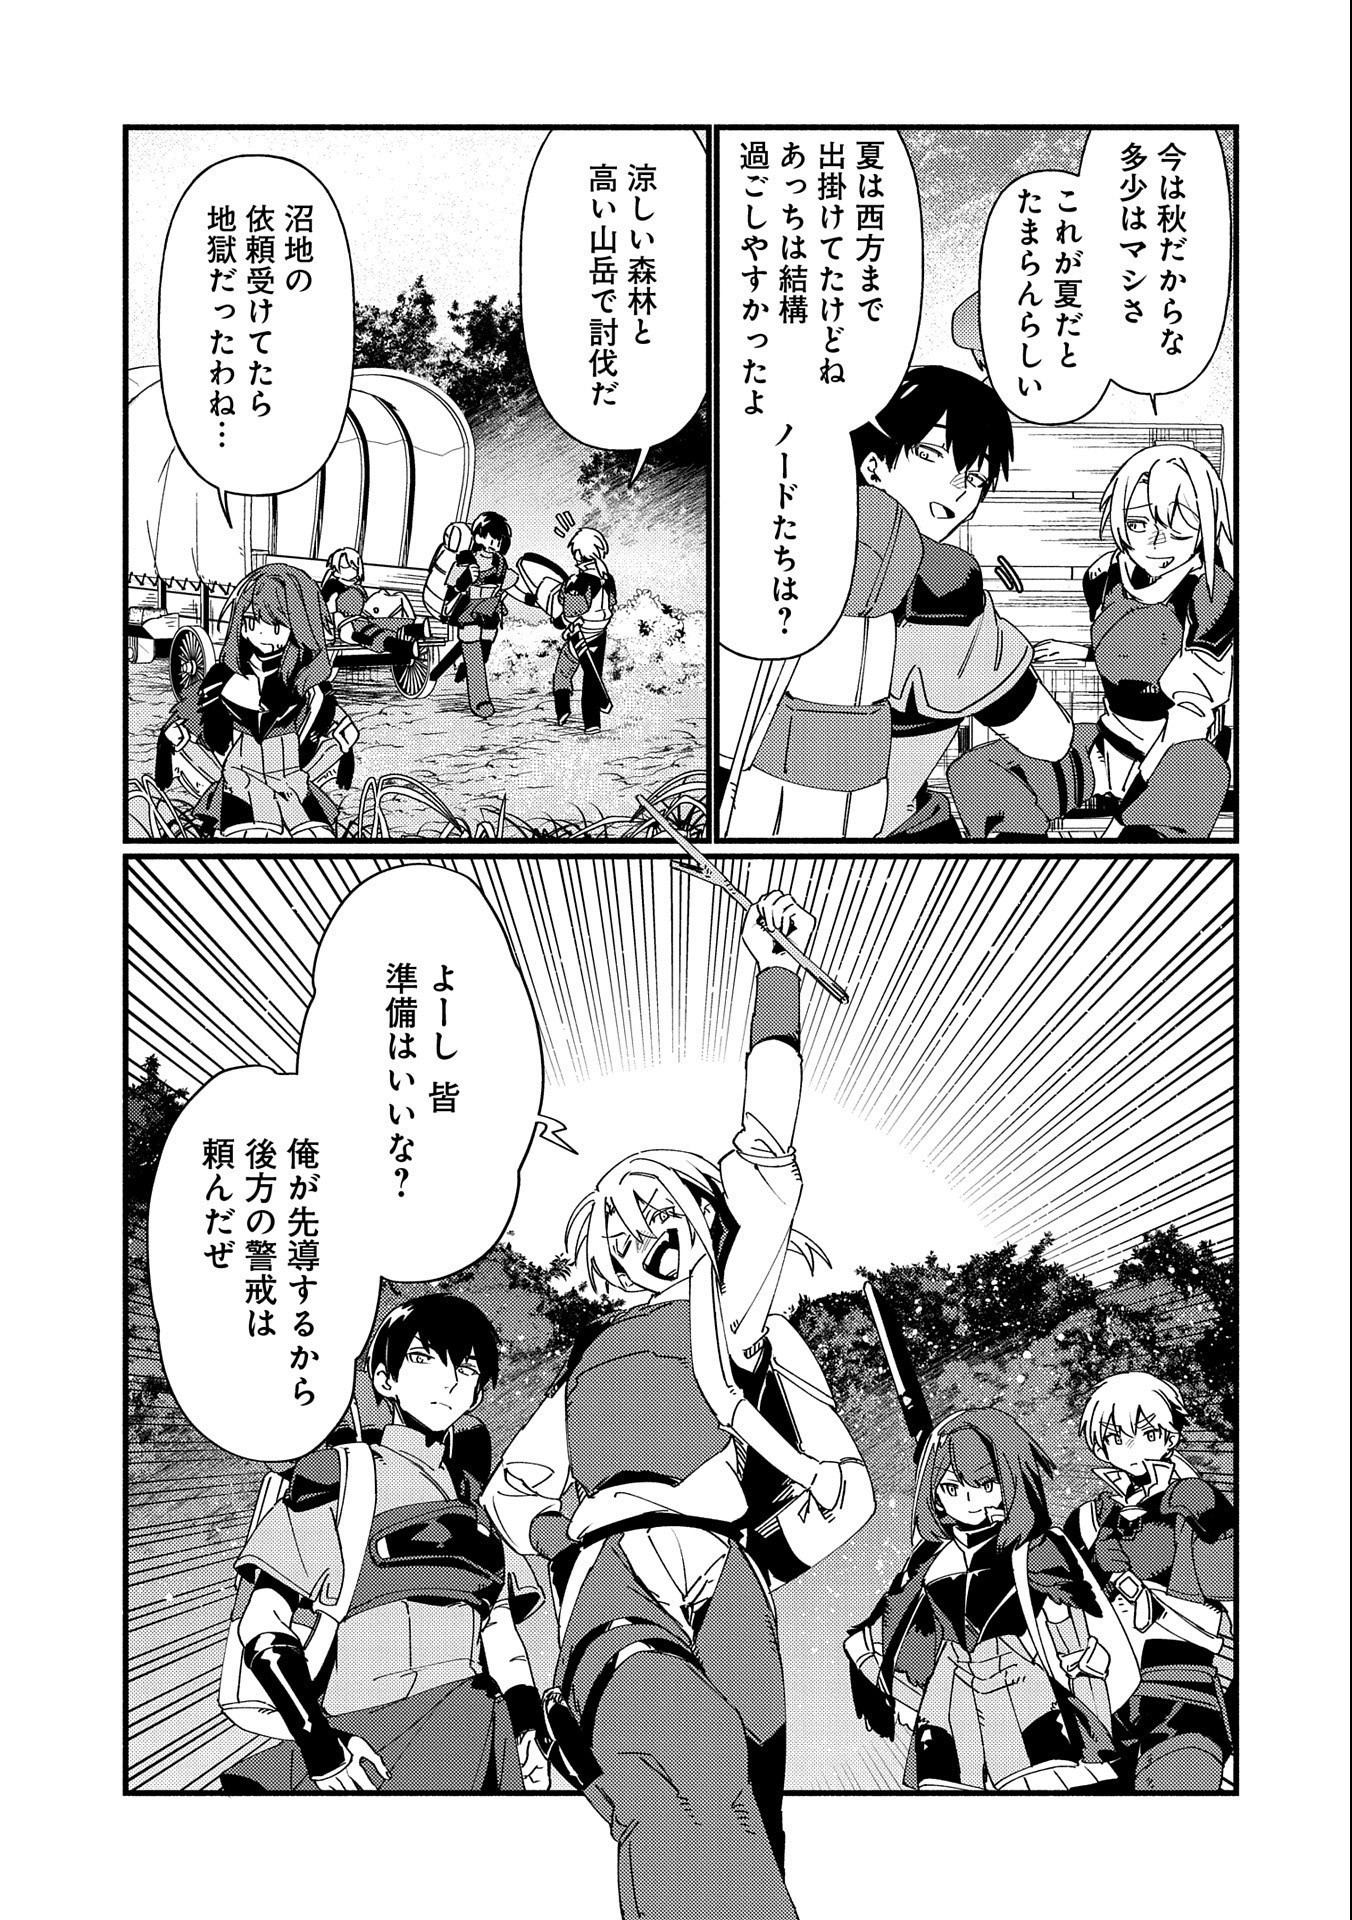 Nord’s Adventure 第7.2話 - Page 3